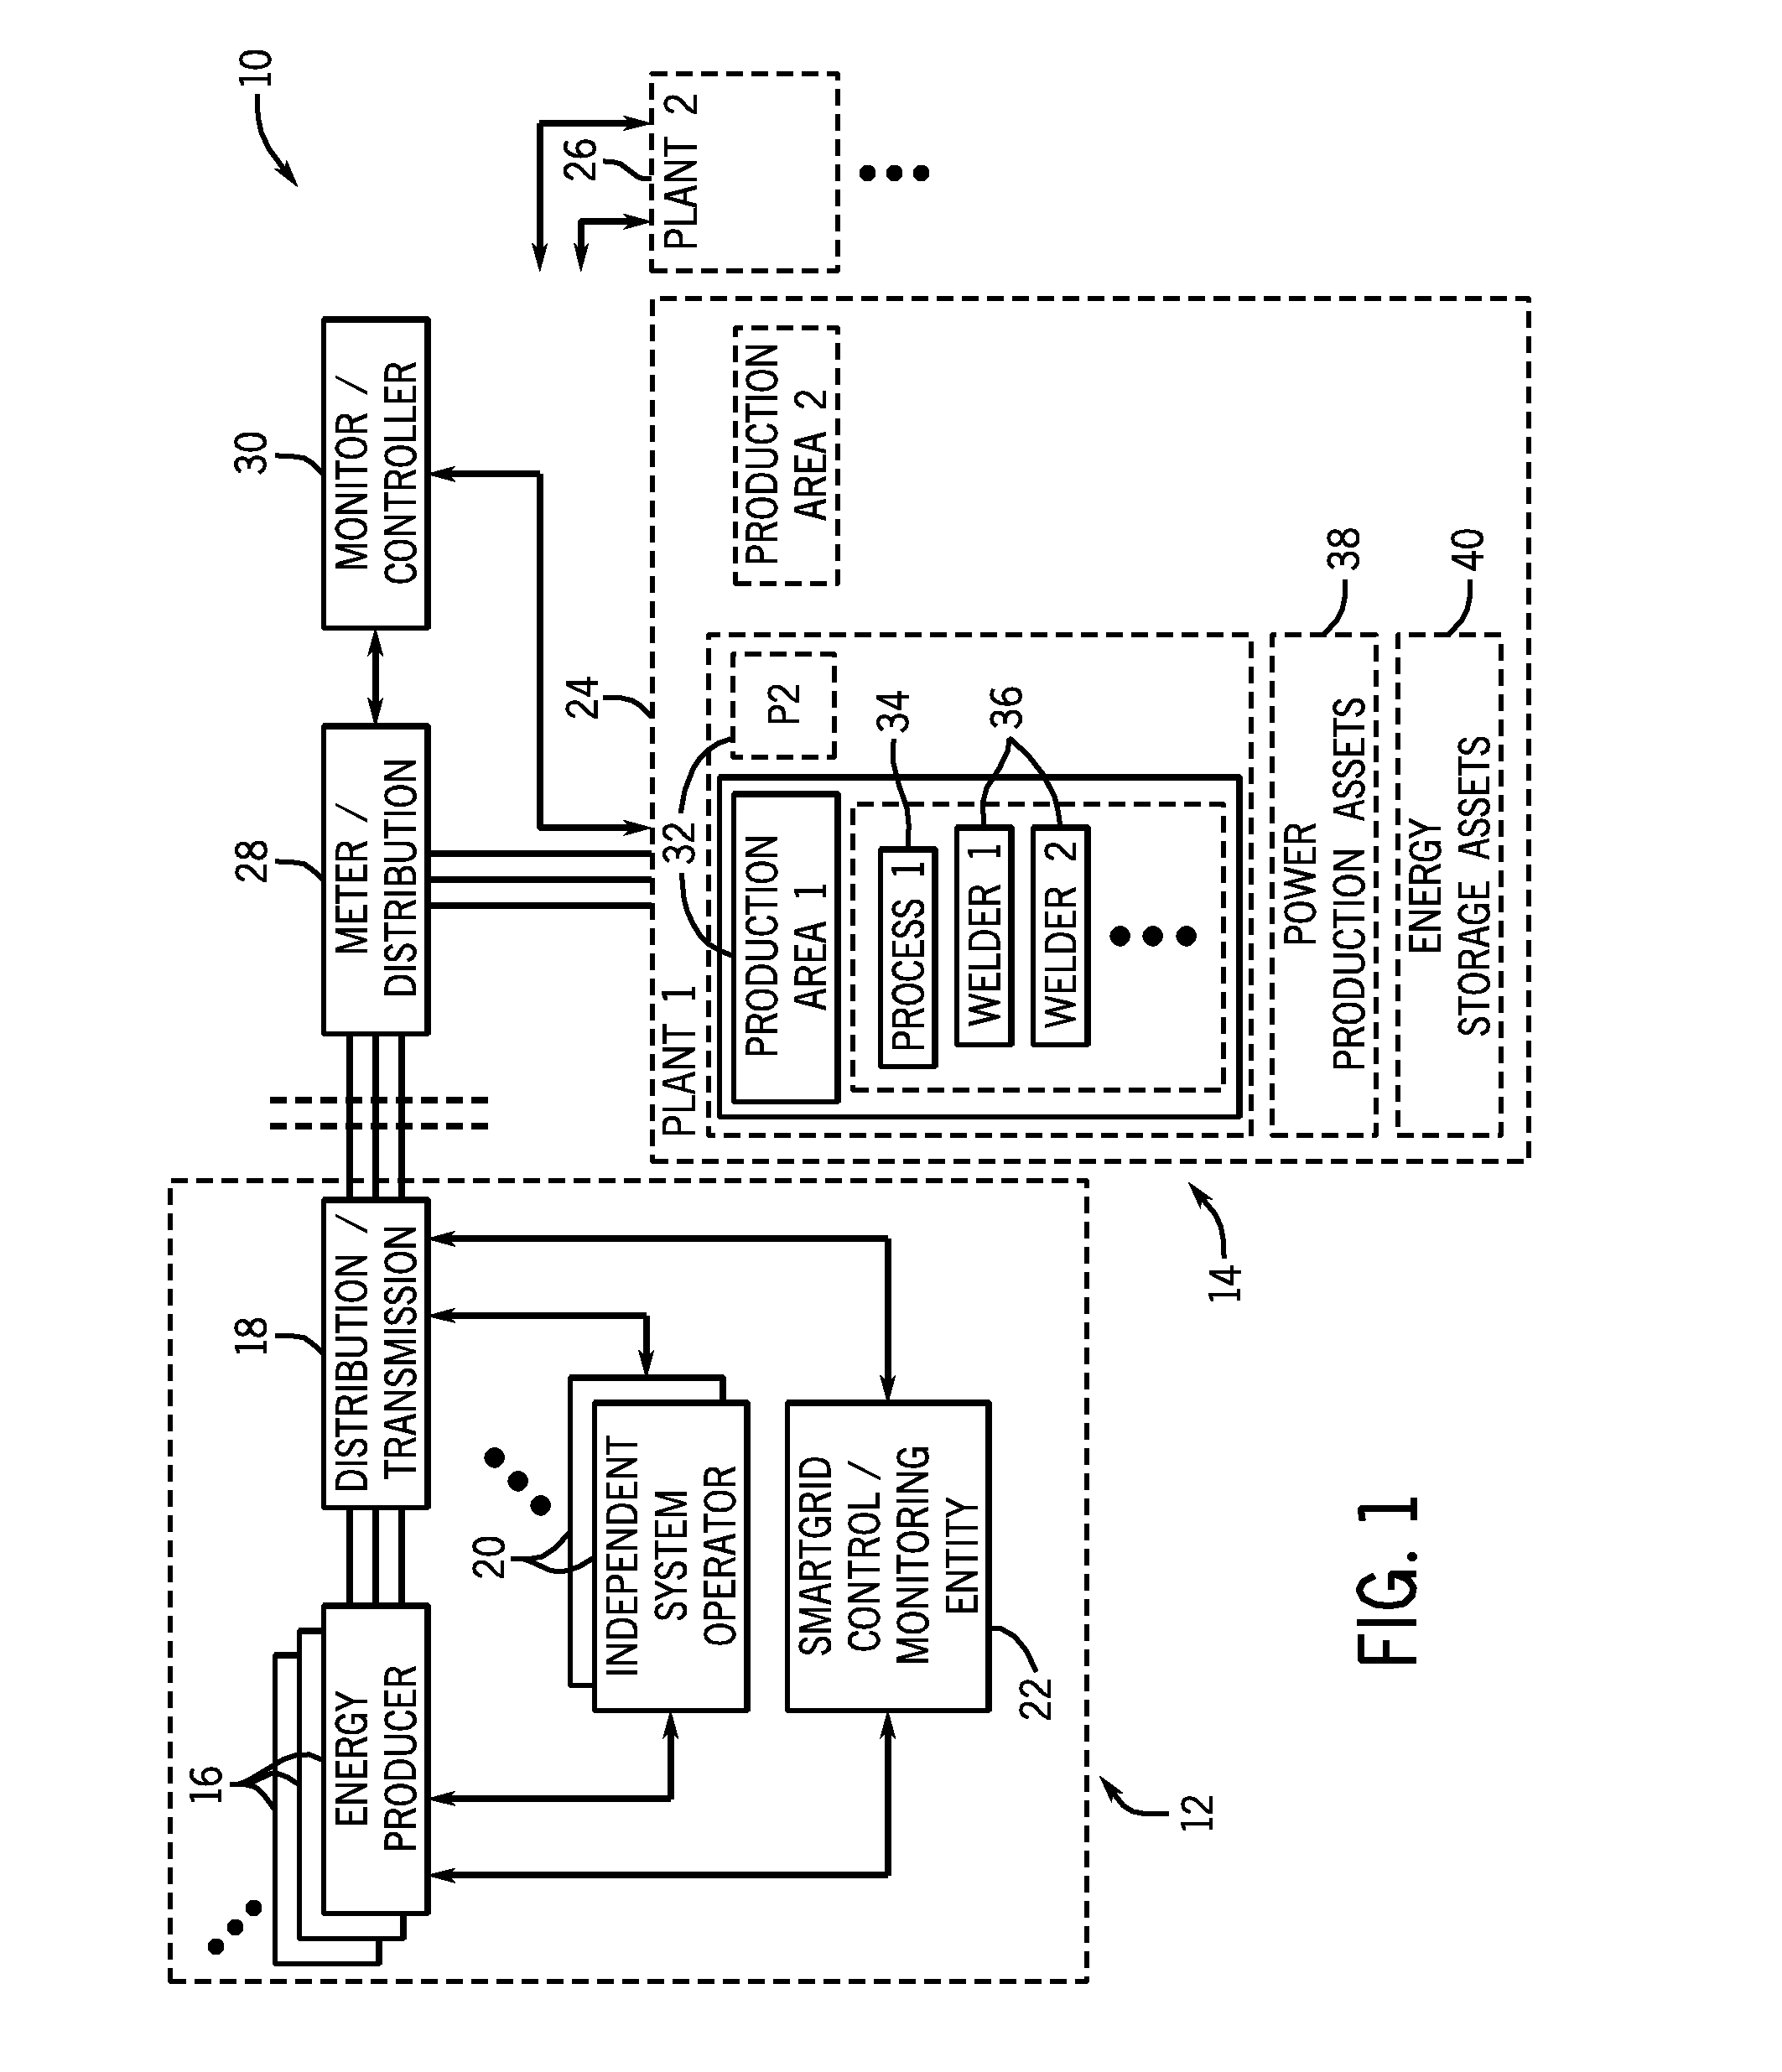 Welding system having a power grid interface